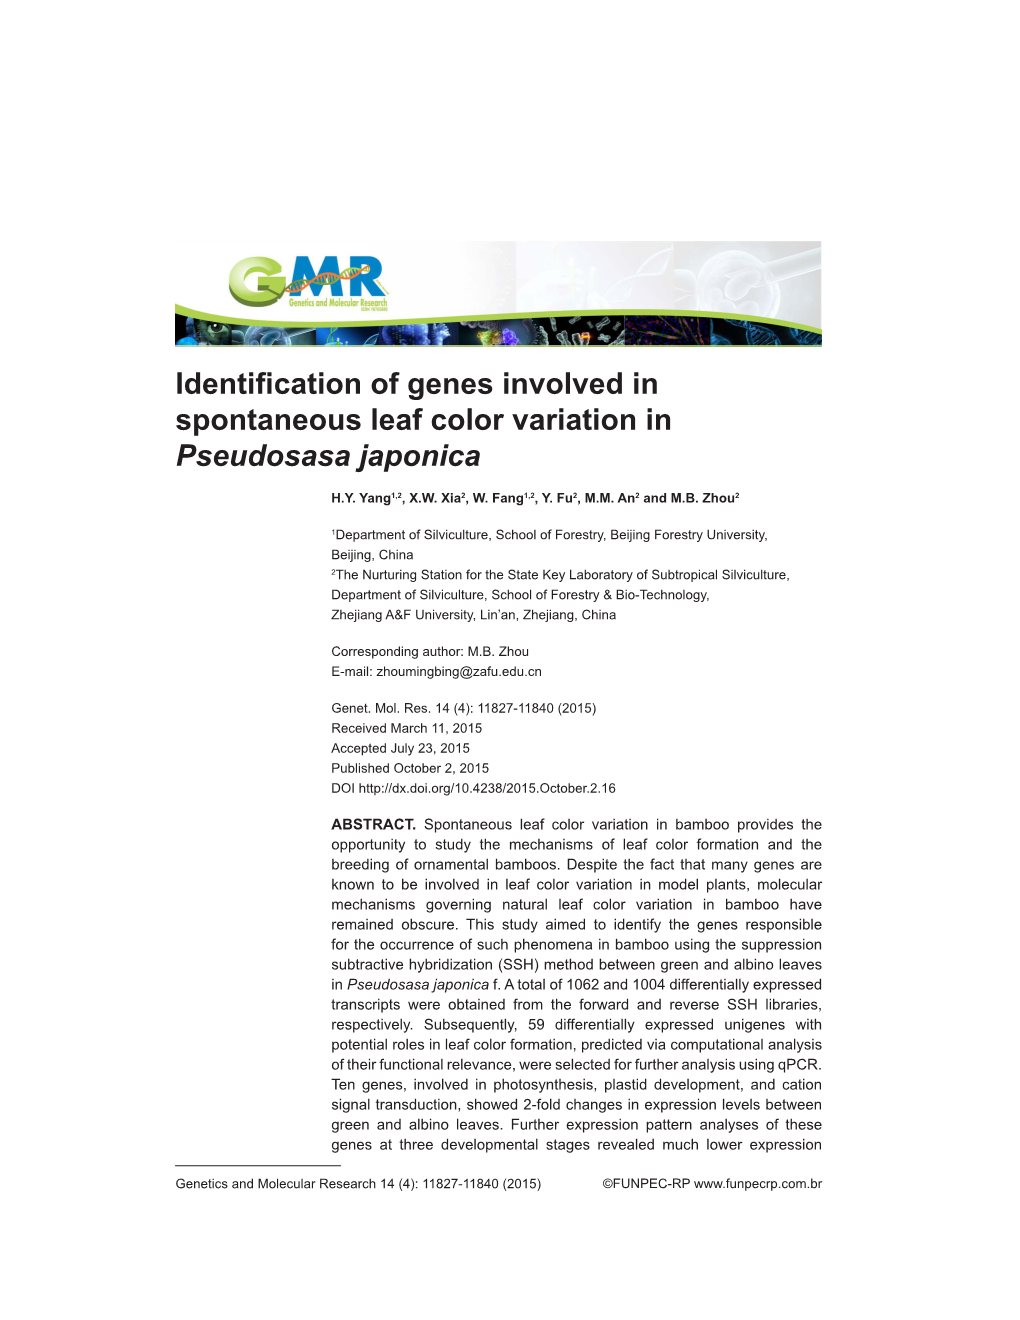 Identification of Genes Involved in Spontaneous Leaf Color Variation in Pseudosasa Japonica